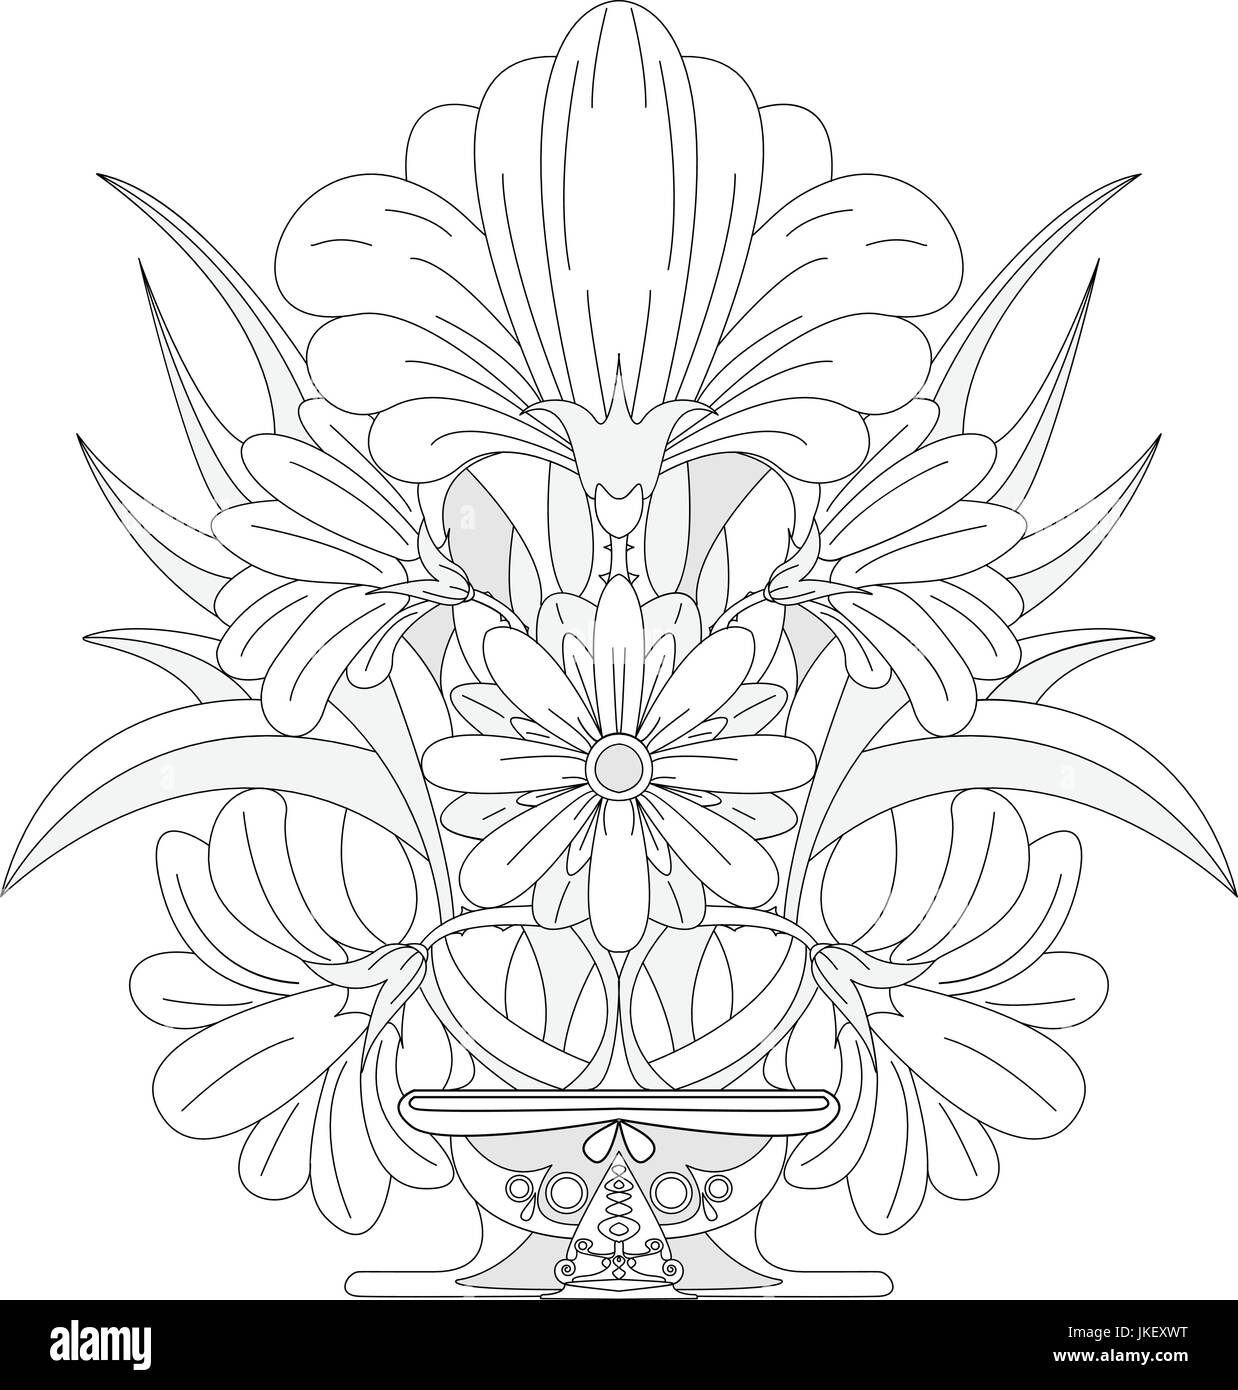 Artwork of coloring page for adult. Flowers. Stock Vector